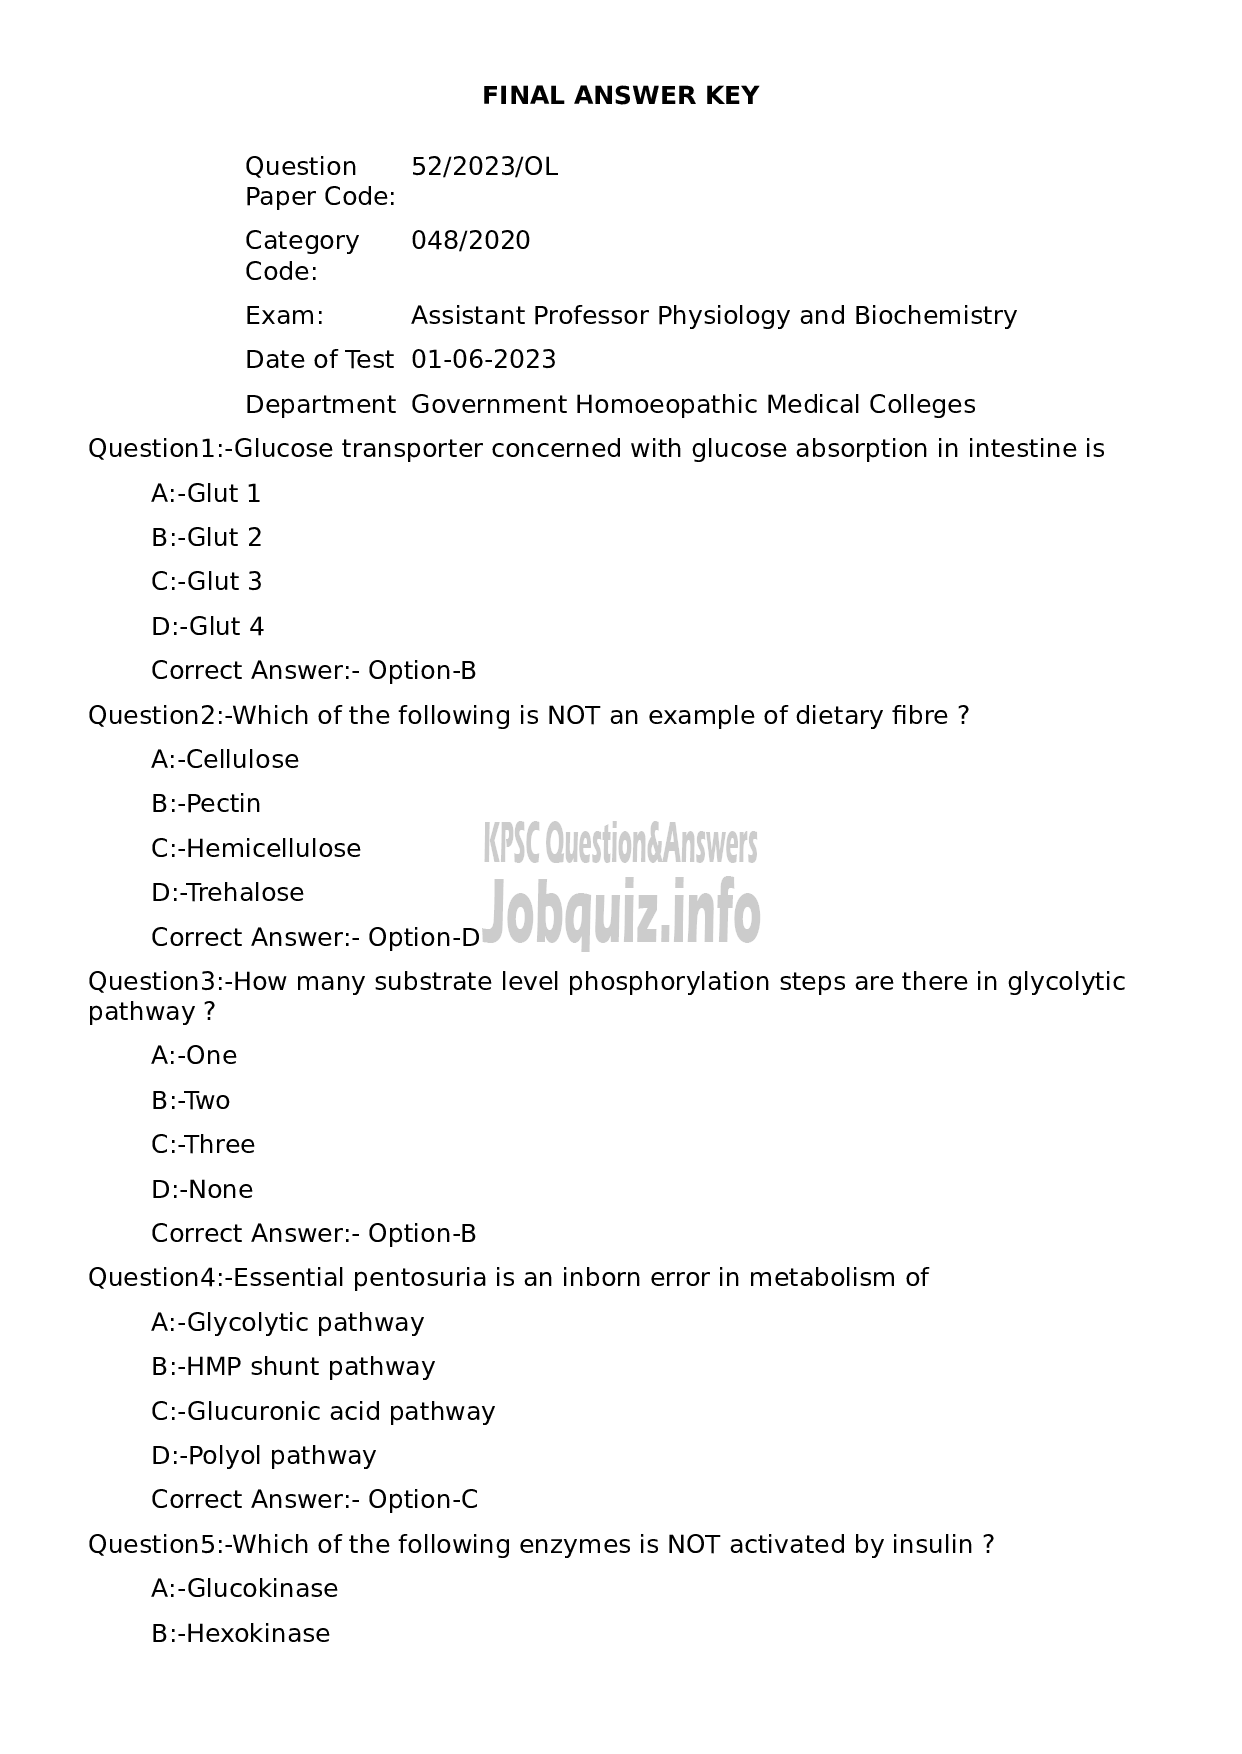 Kerala PSC Question Paper -  Assistant Professor Physiology and Biochemistry-1